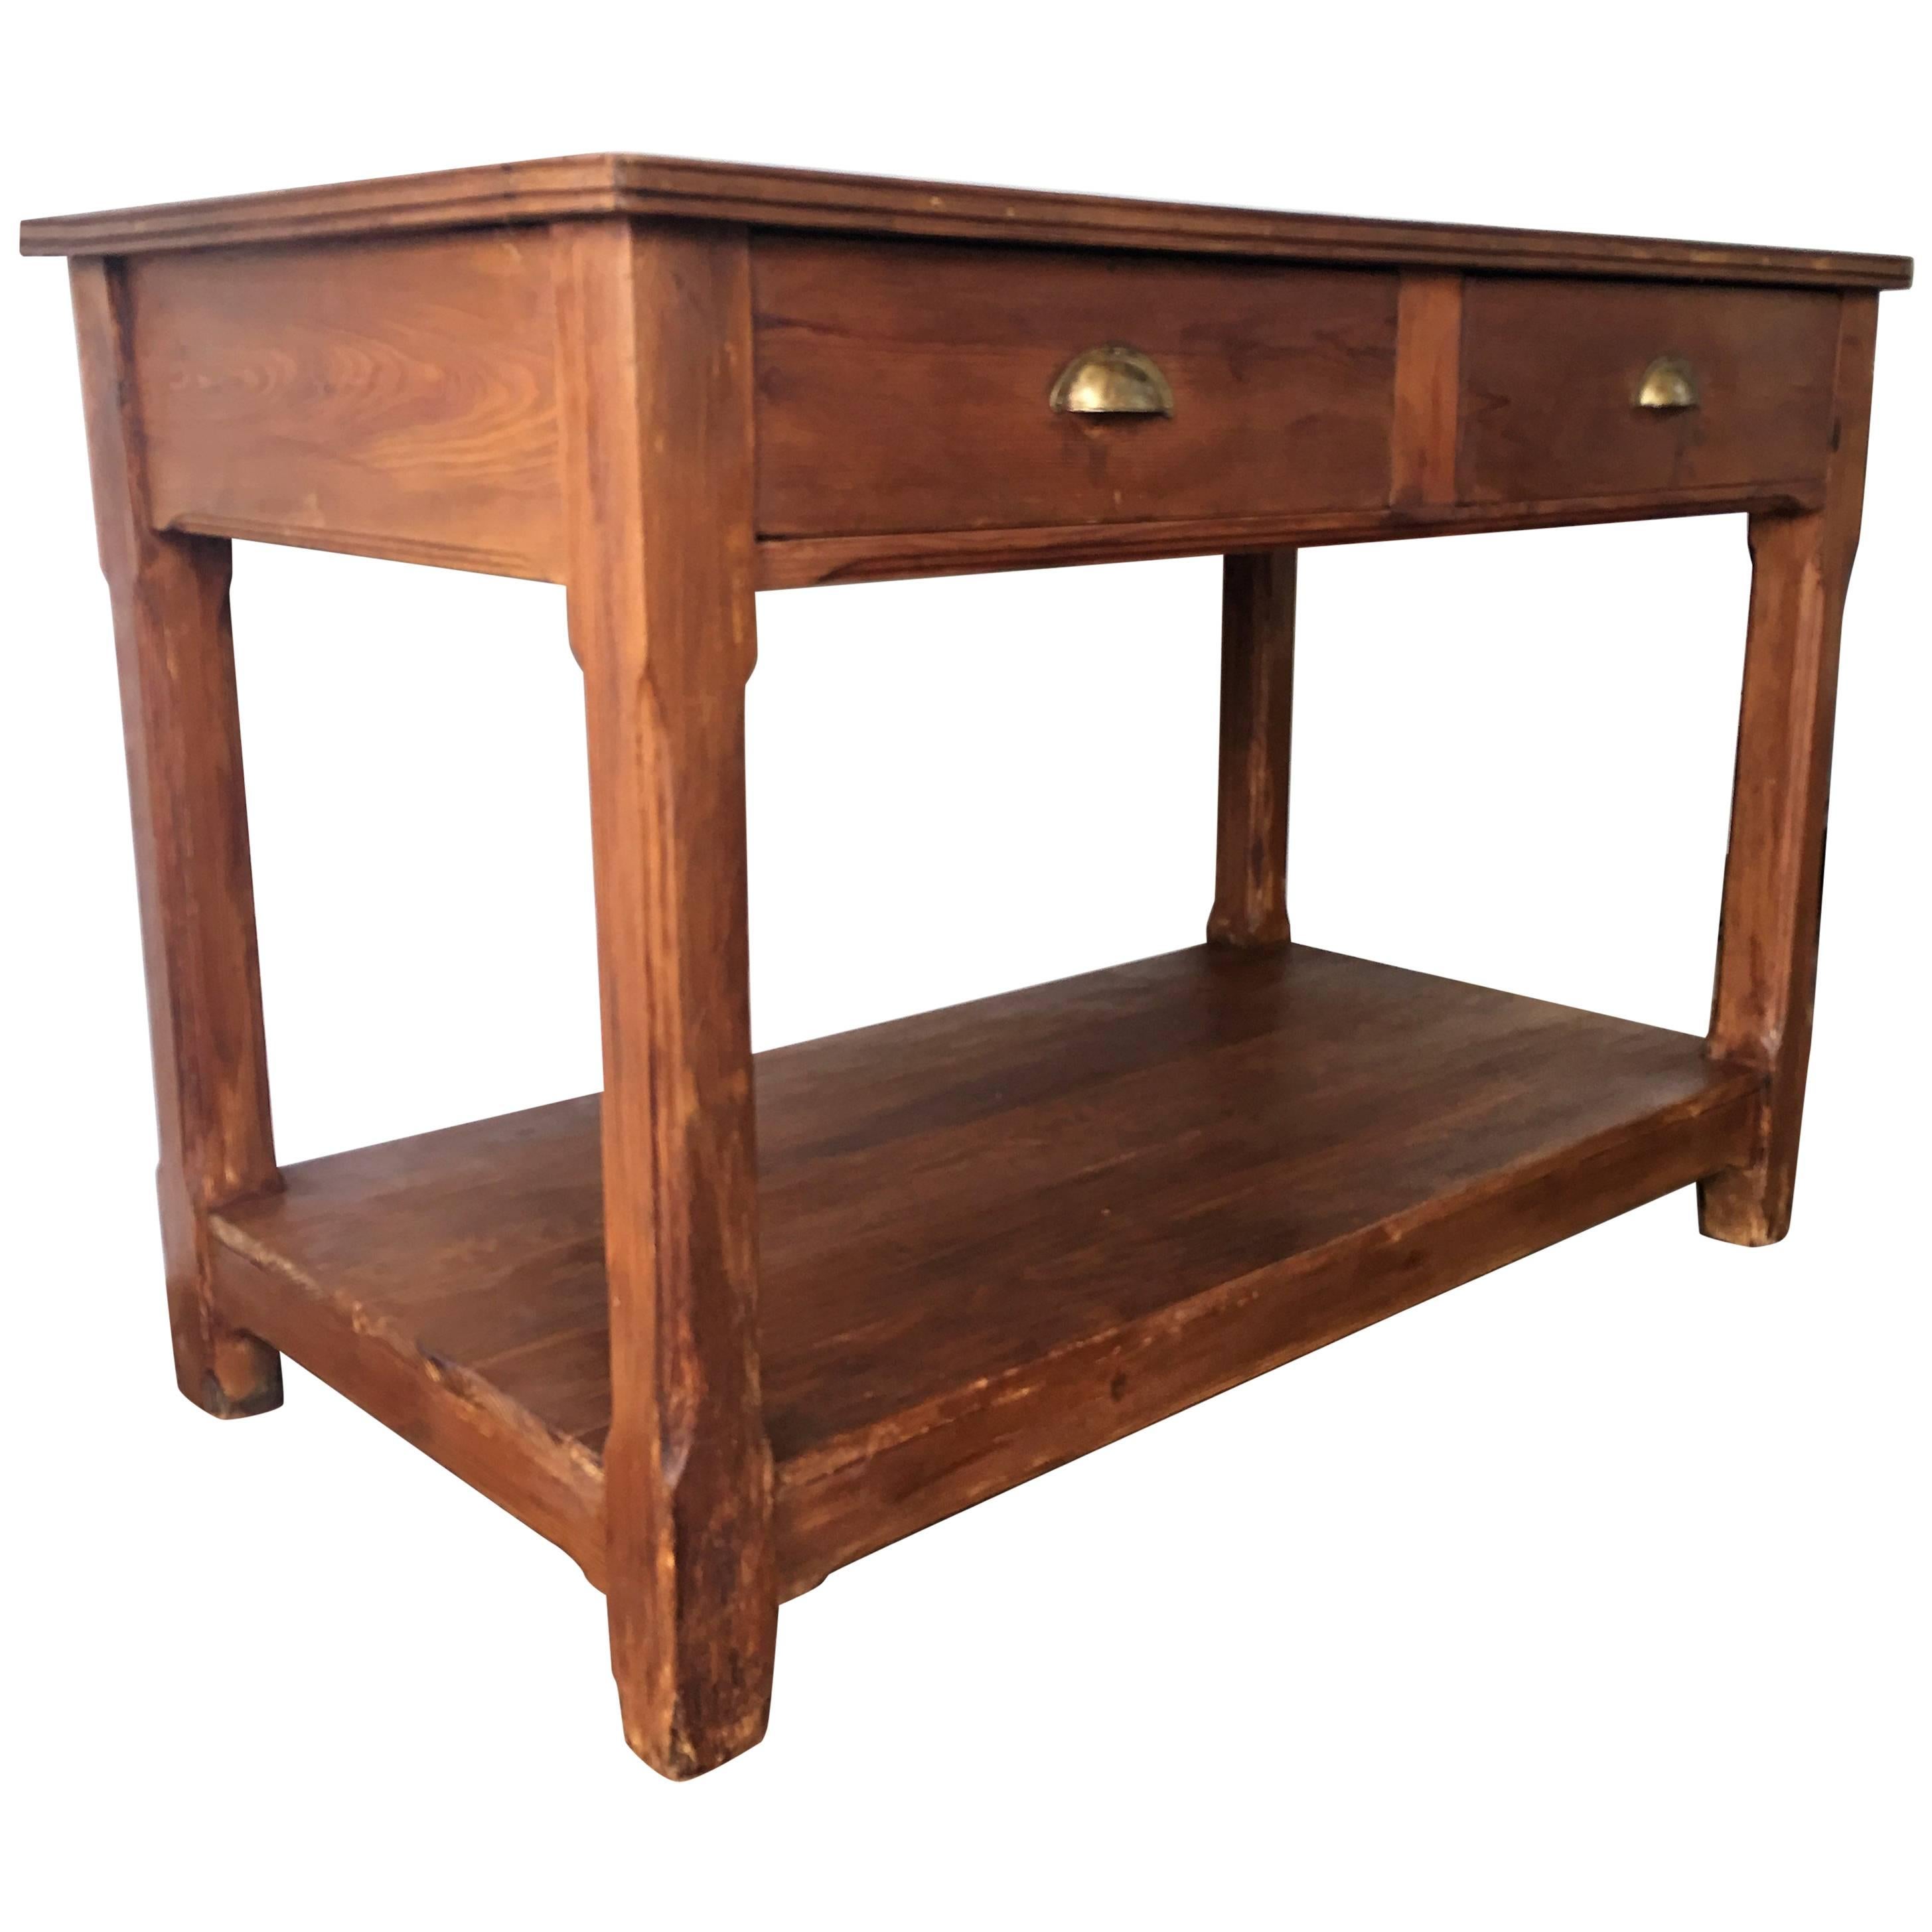 20th Century Pine Kitchen Table, Country Farm Table with Two Drawers